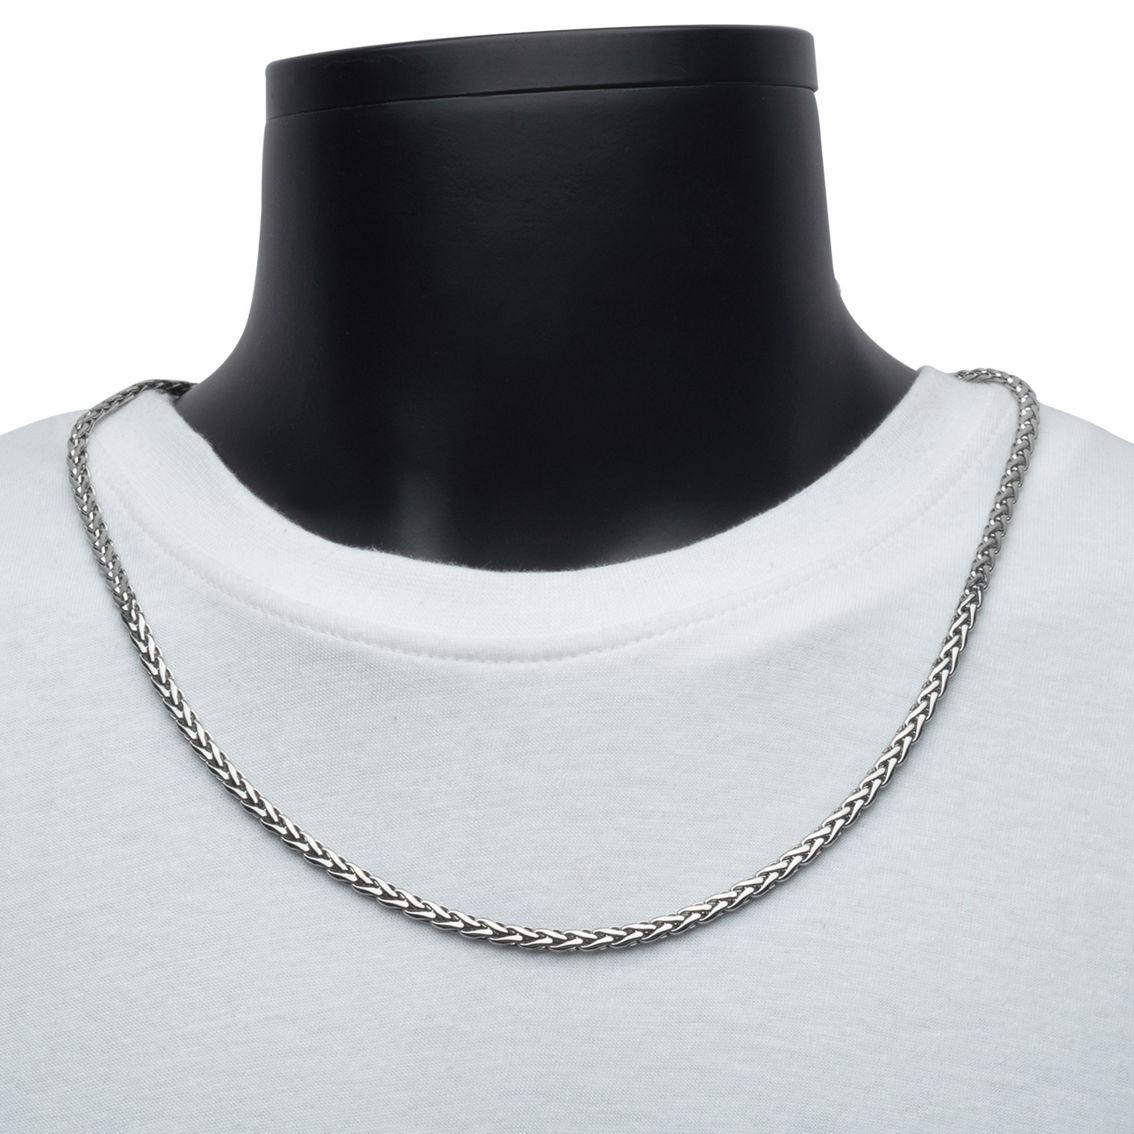 Inox Polished Finish Stainless Steel Spiga Chain Necklace - Image 4 of 4